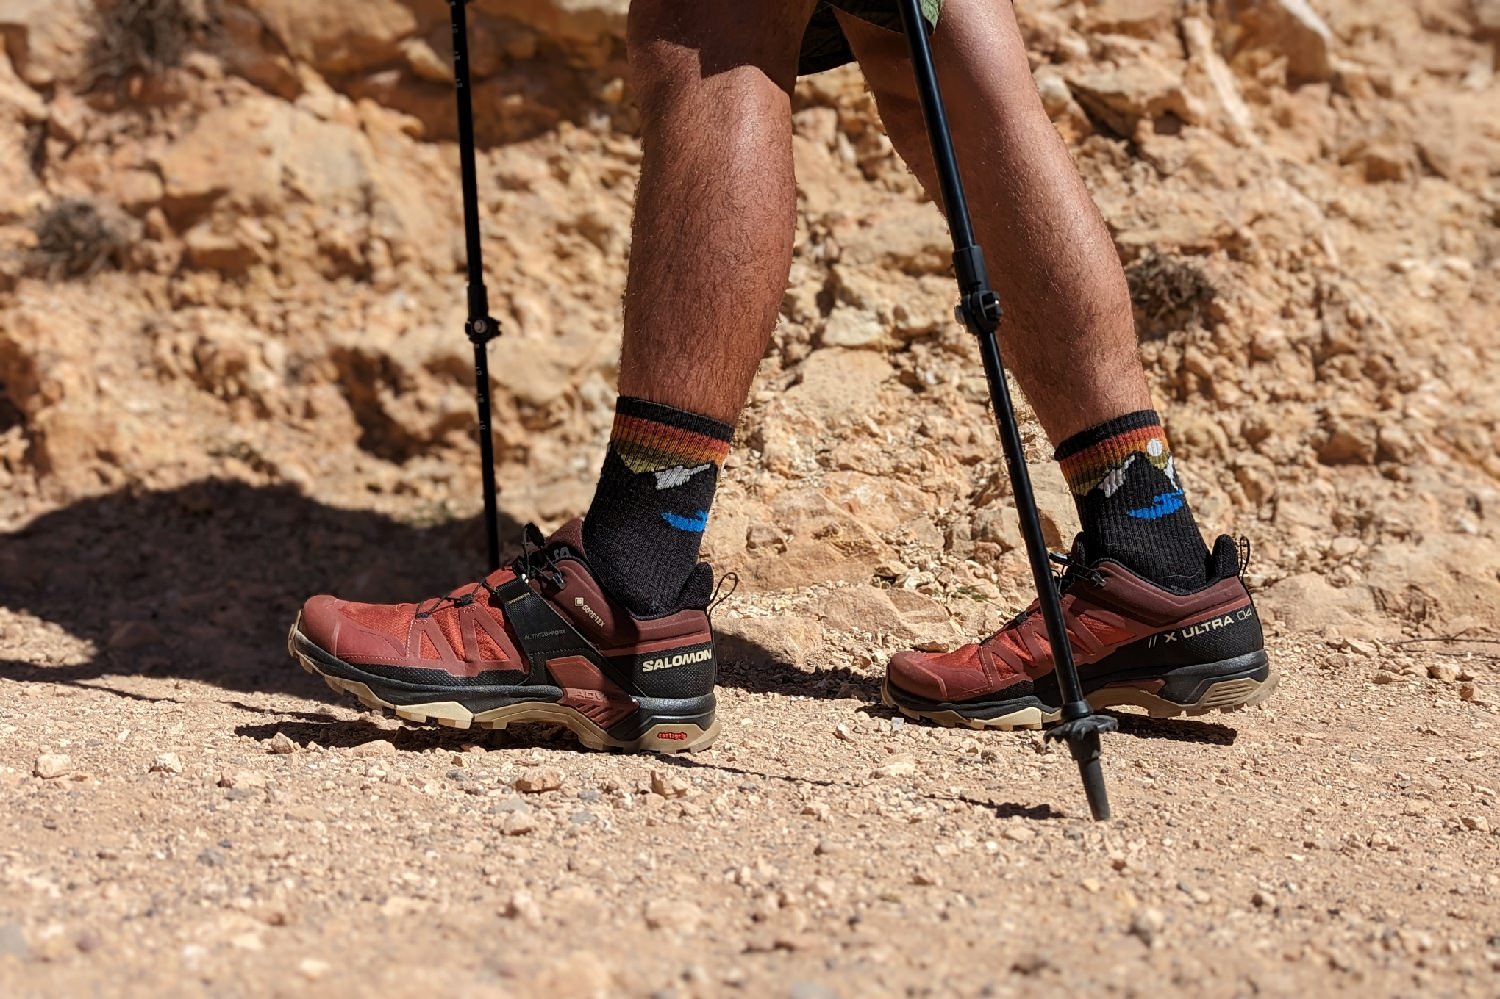 A close up view of a hikers from the knee down wearing Salomon X Ultra 4 hiking shoes on a sandy trail. There's a rocky canyon wall in the background.